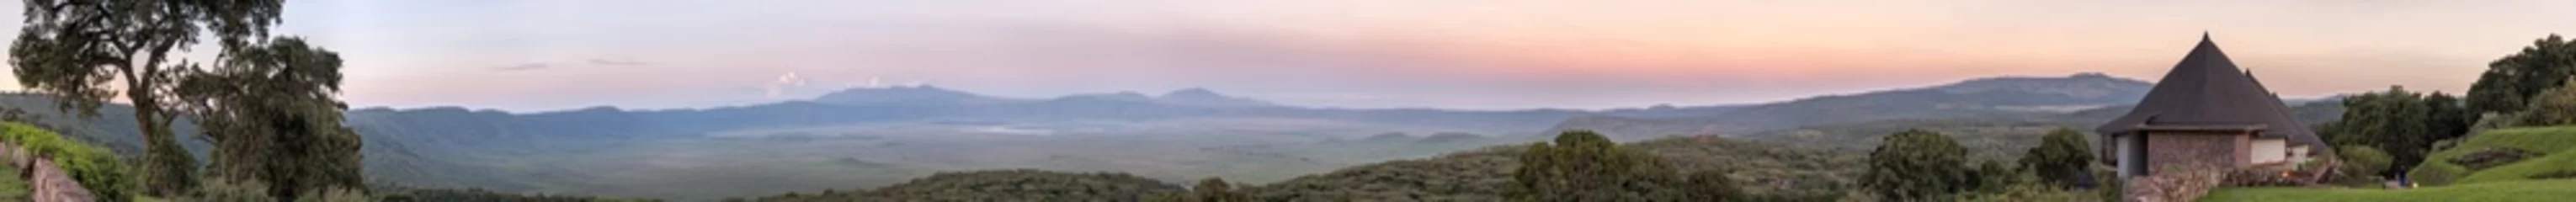 Poster Panoramic view of huge Ngorongoro caldera (extinct volcano crater) with lodge hotel bungalows against sunrise glow background. Great Rift Valley, Tanzania, East Africa.    © shujaa_777